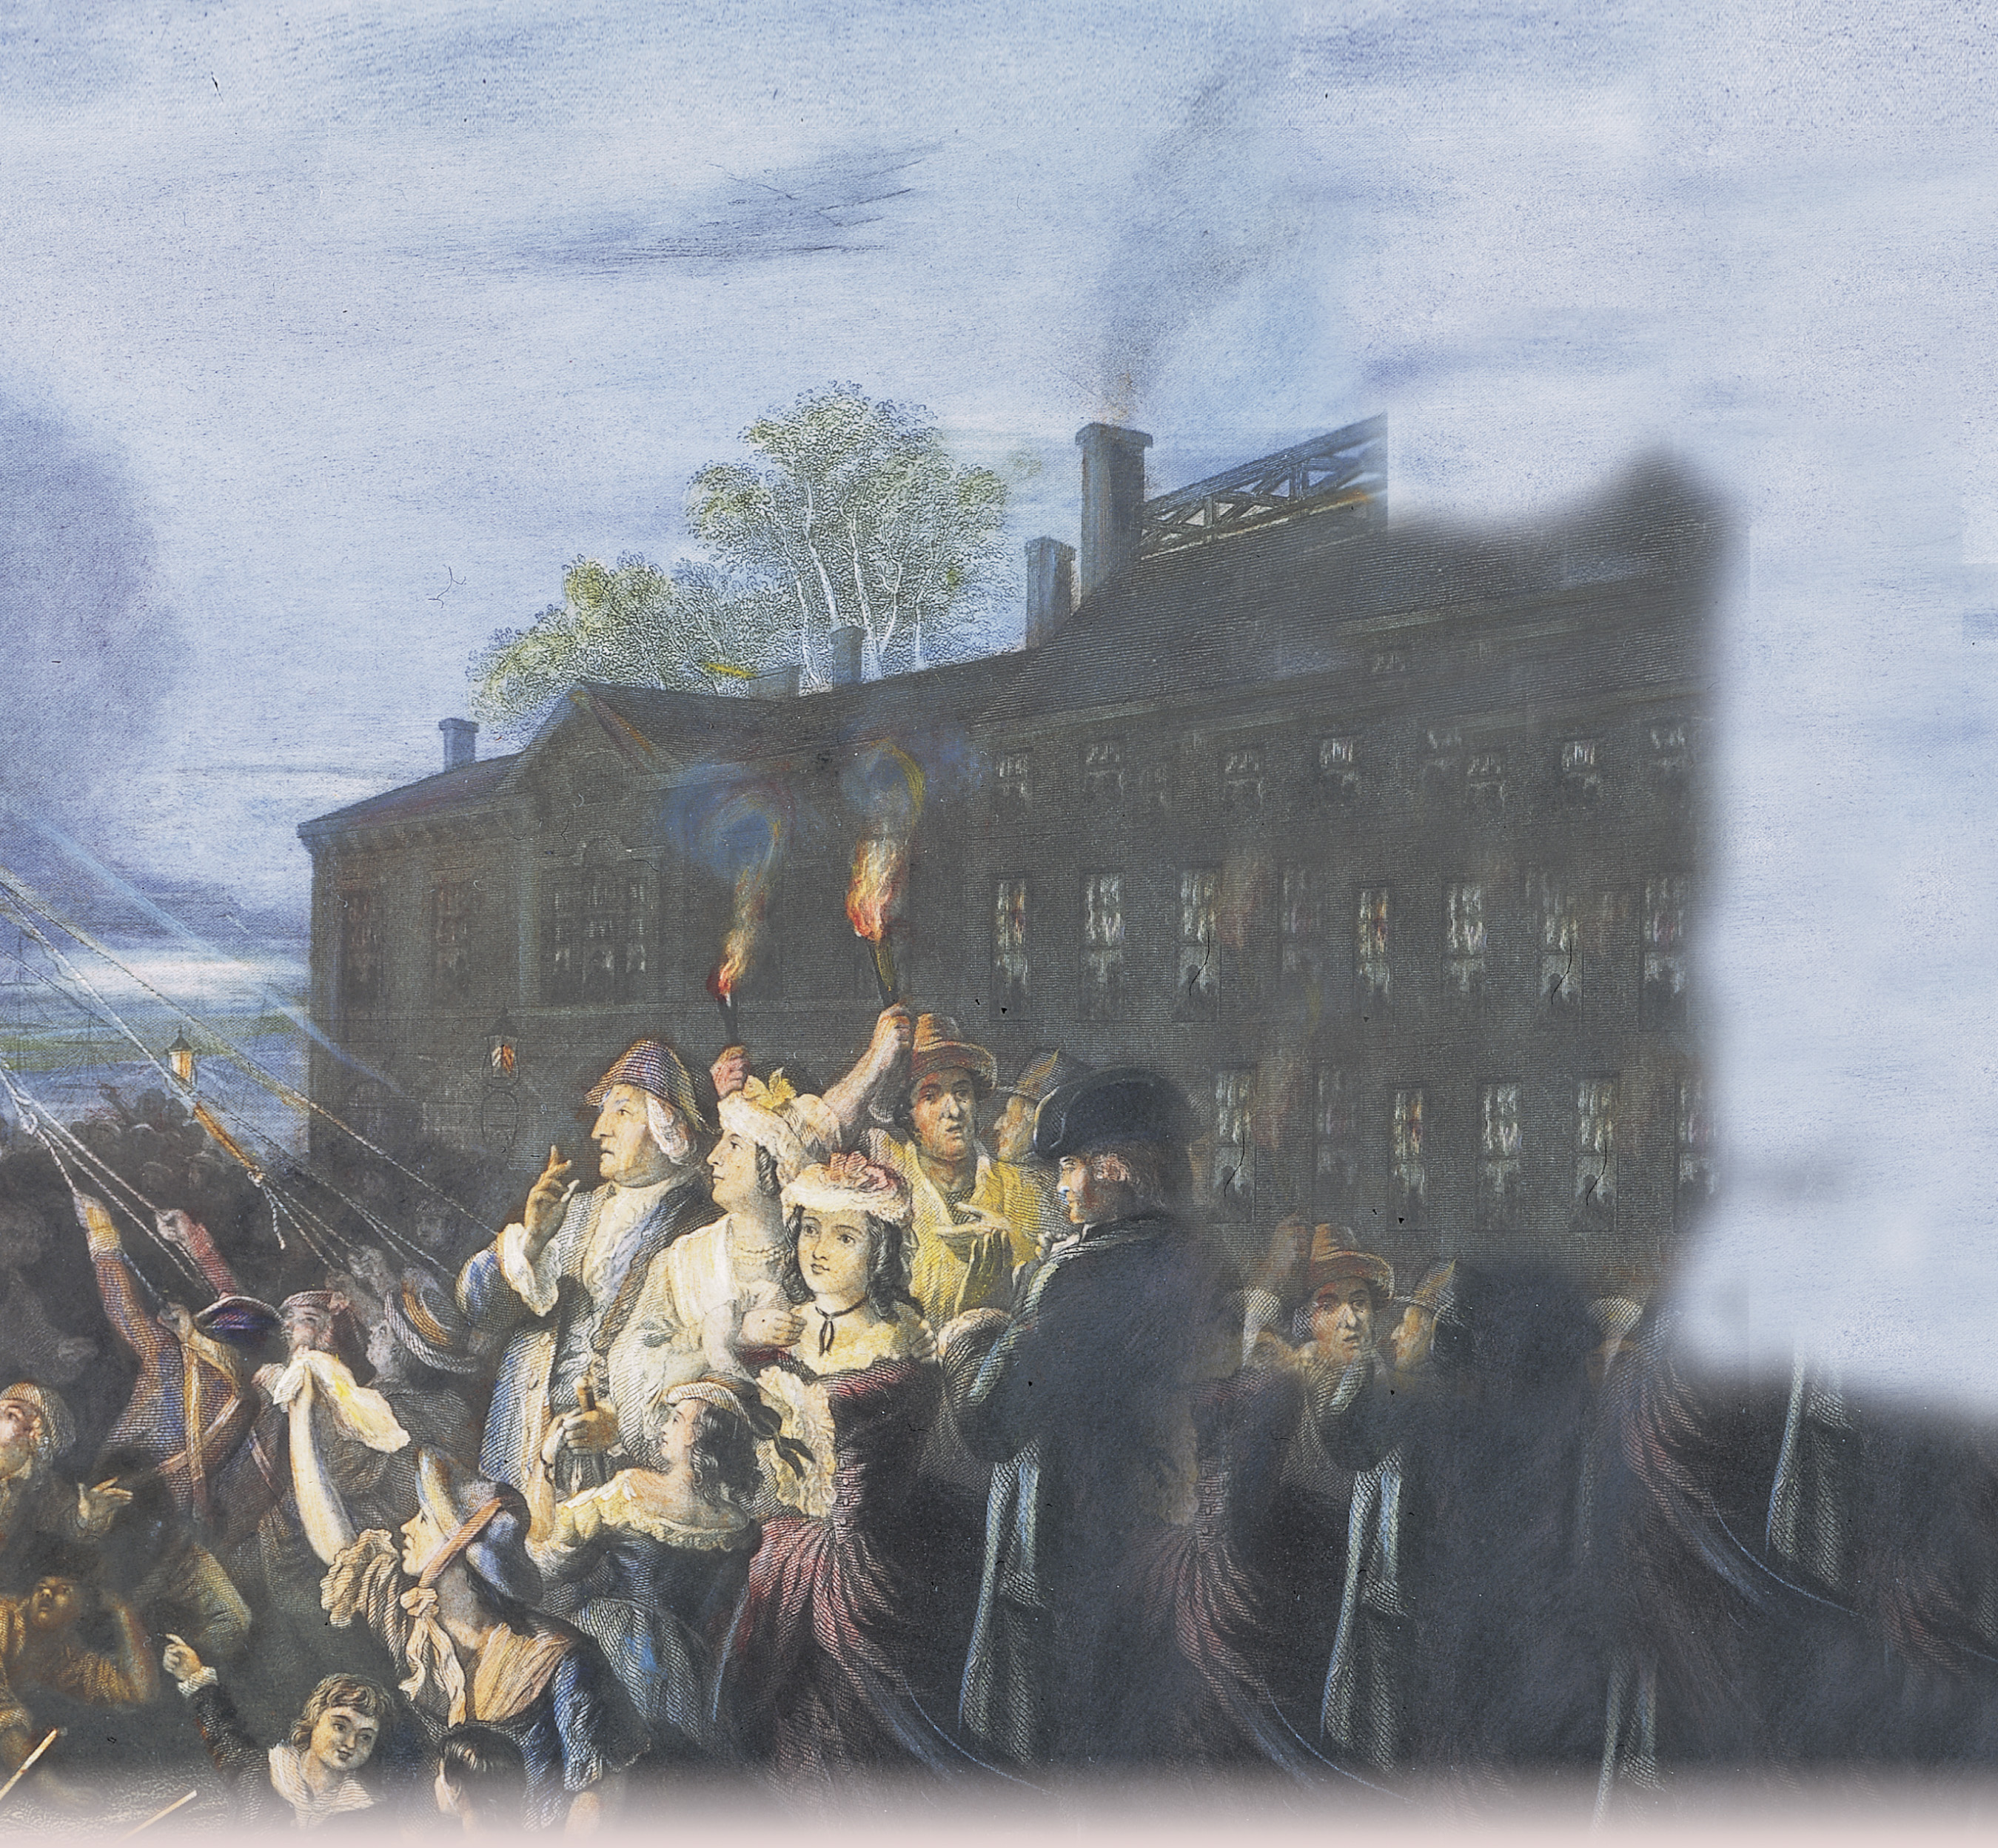 painting: a mob of colonists prepares to pull down a statue of a king on horseback. A title: War for Independence.